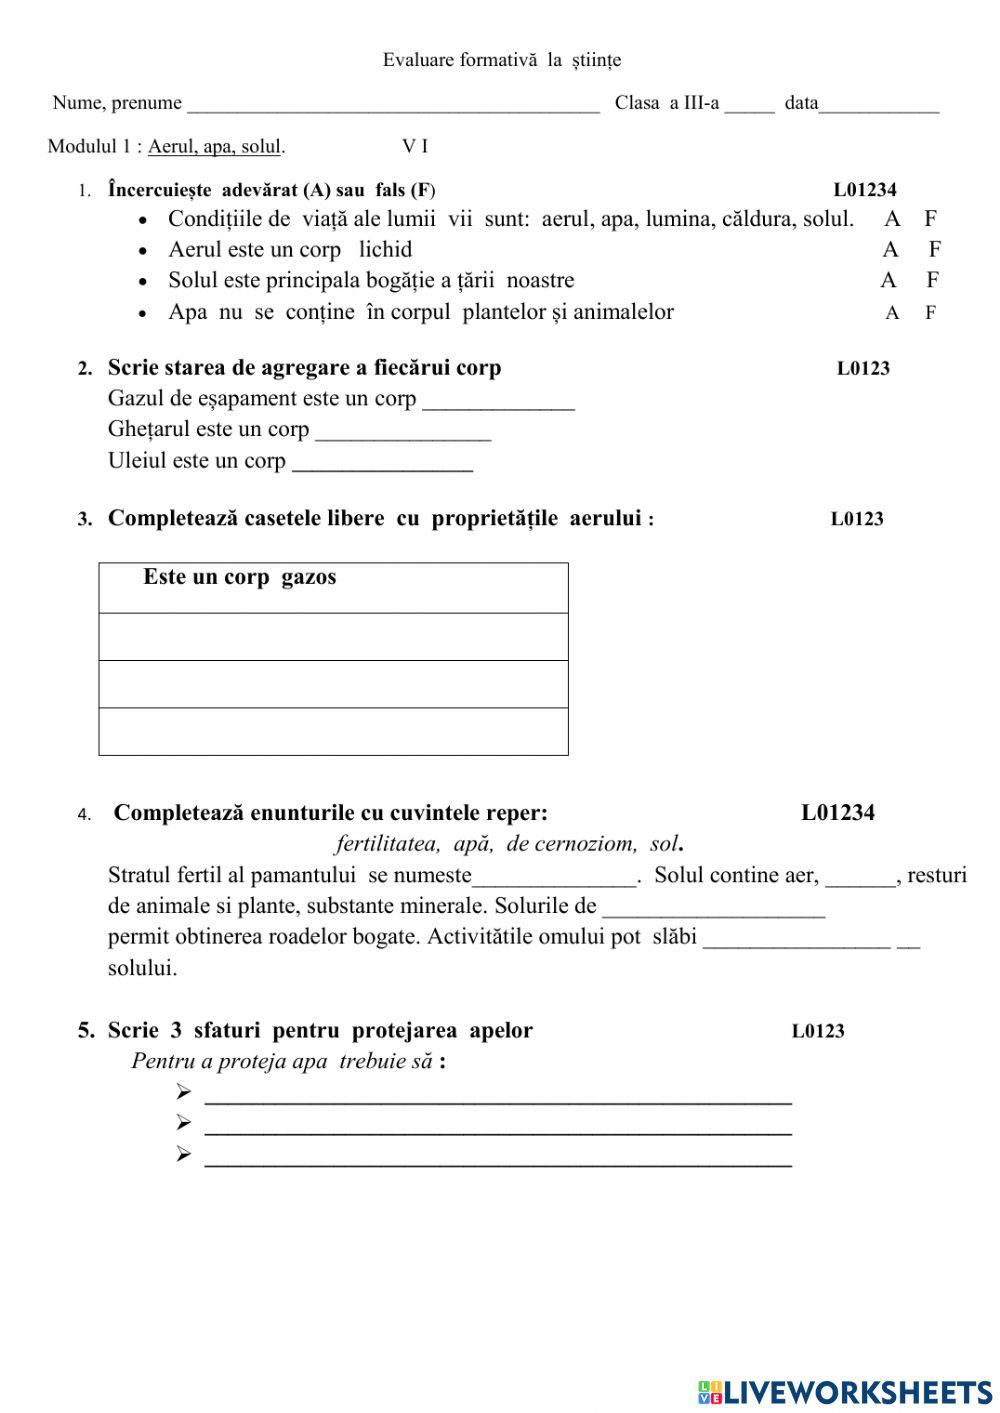 Evaluare formativa interactive activity for clasa a3-a | Live Worksheets